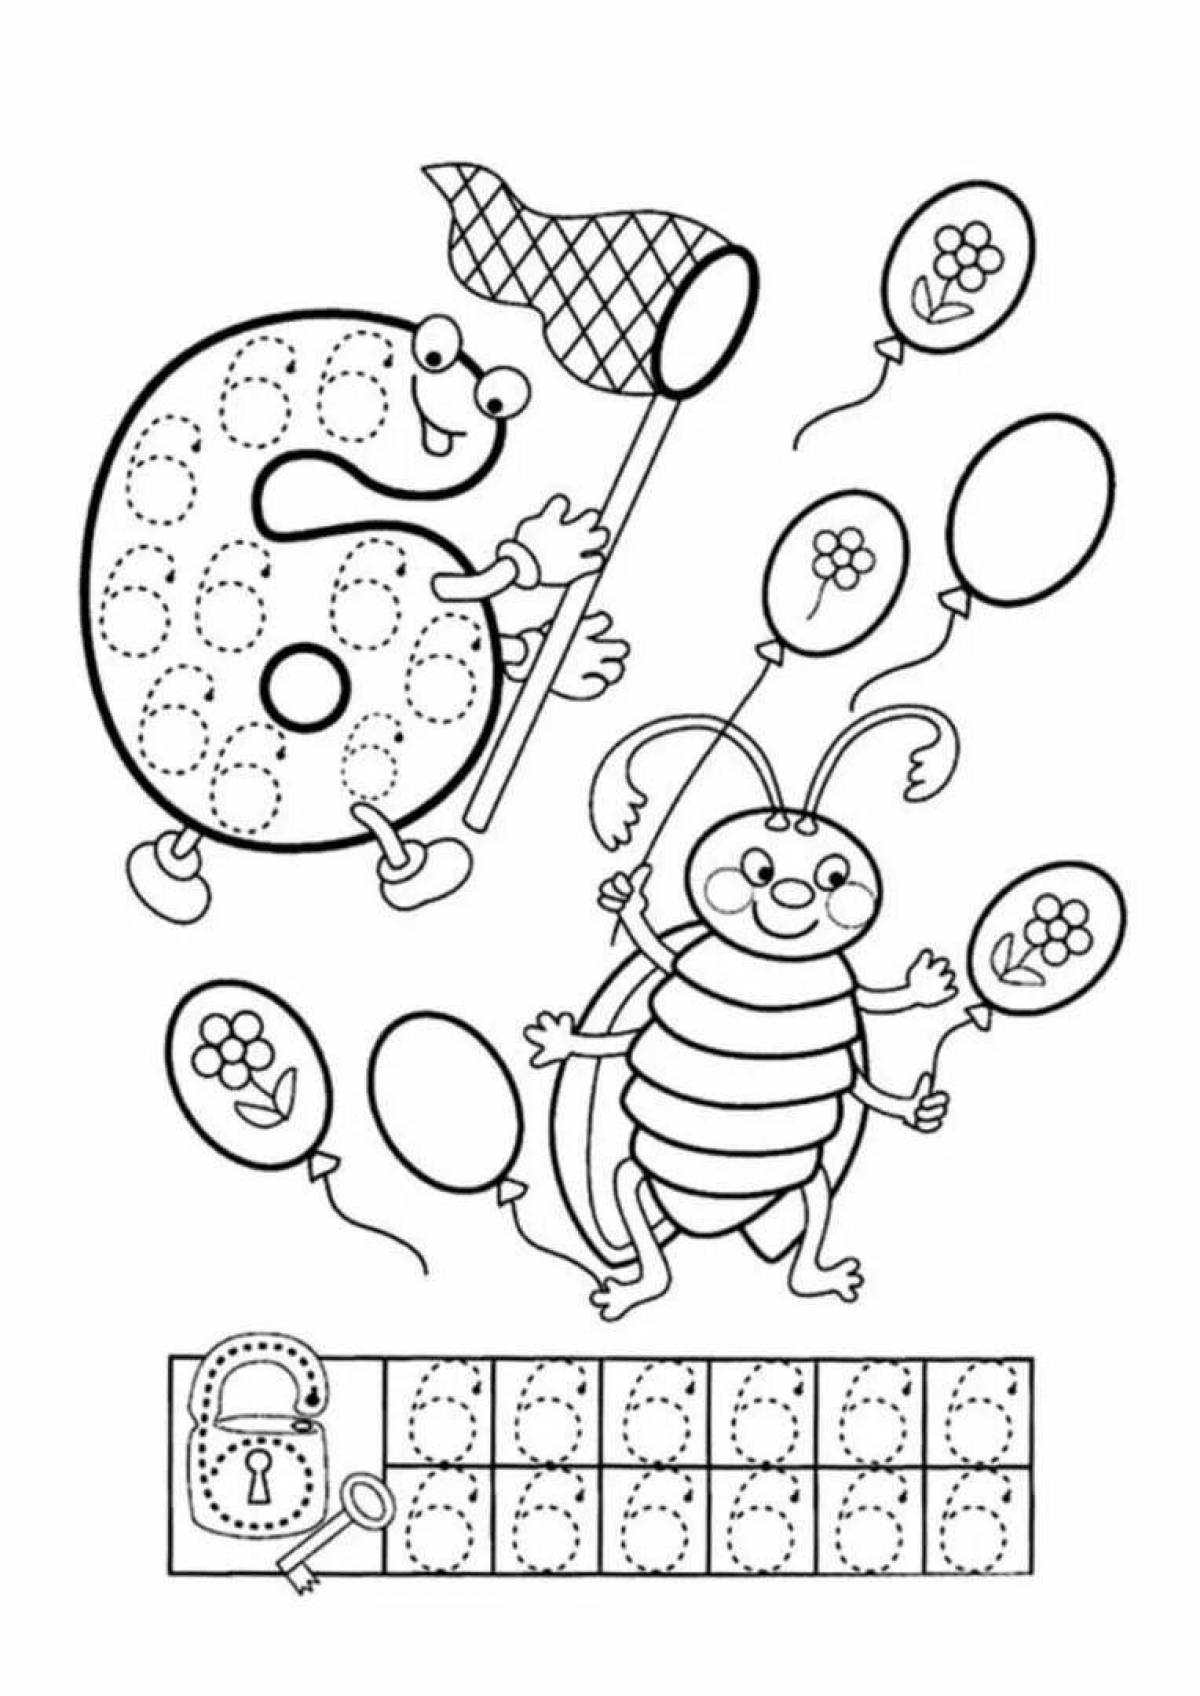 Coloring book bright combination of numbers and letters for children